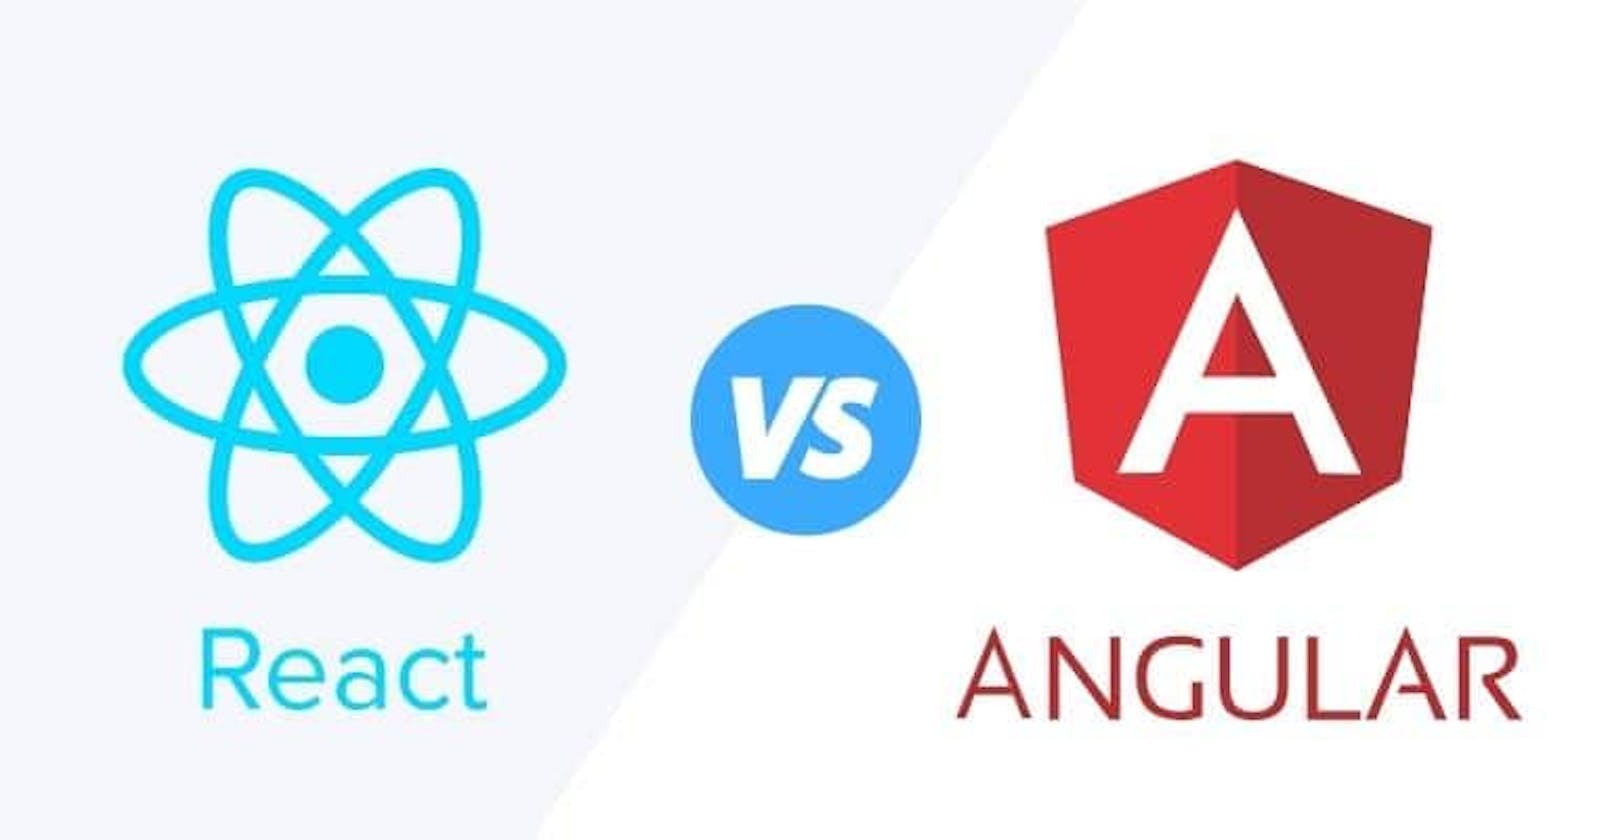 Angular vs. React: Choosing the Right Framework for Your Project